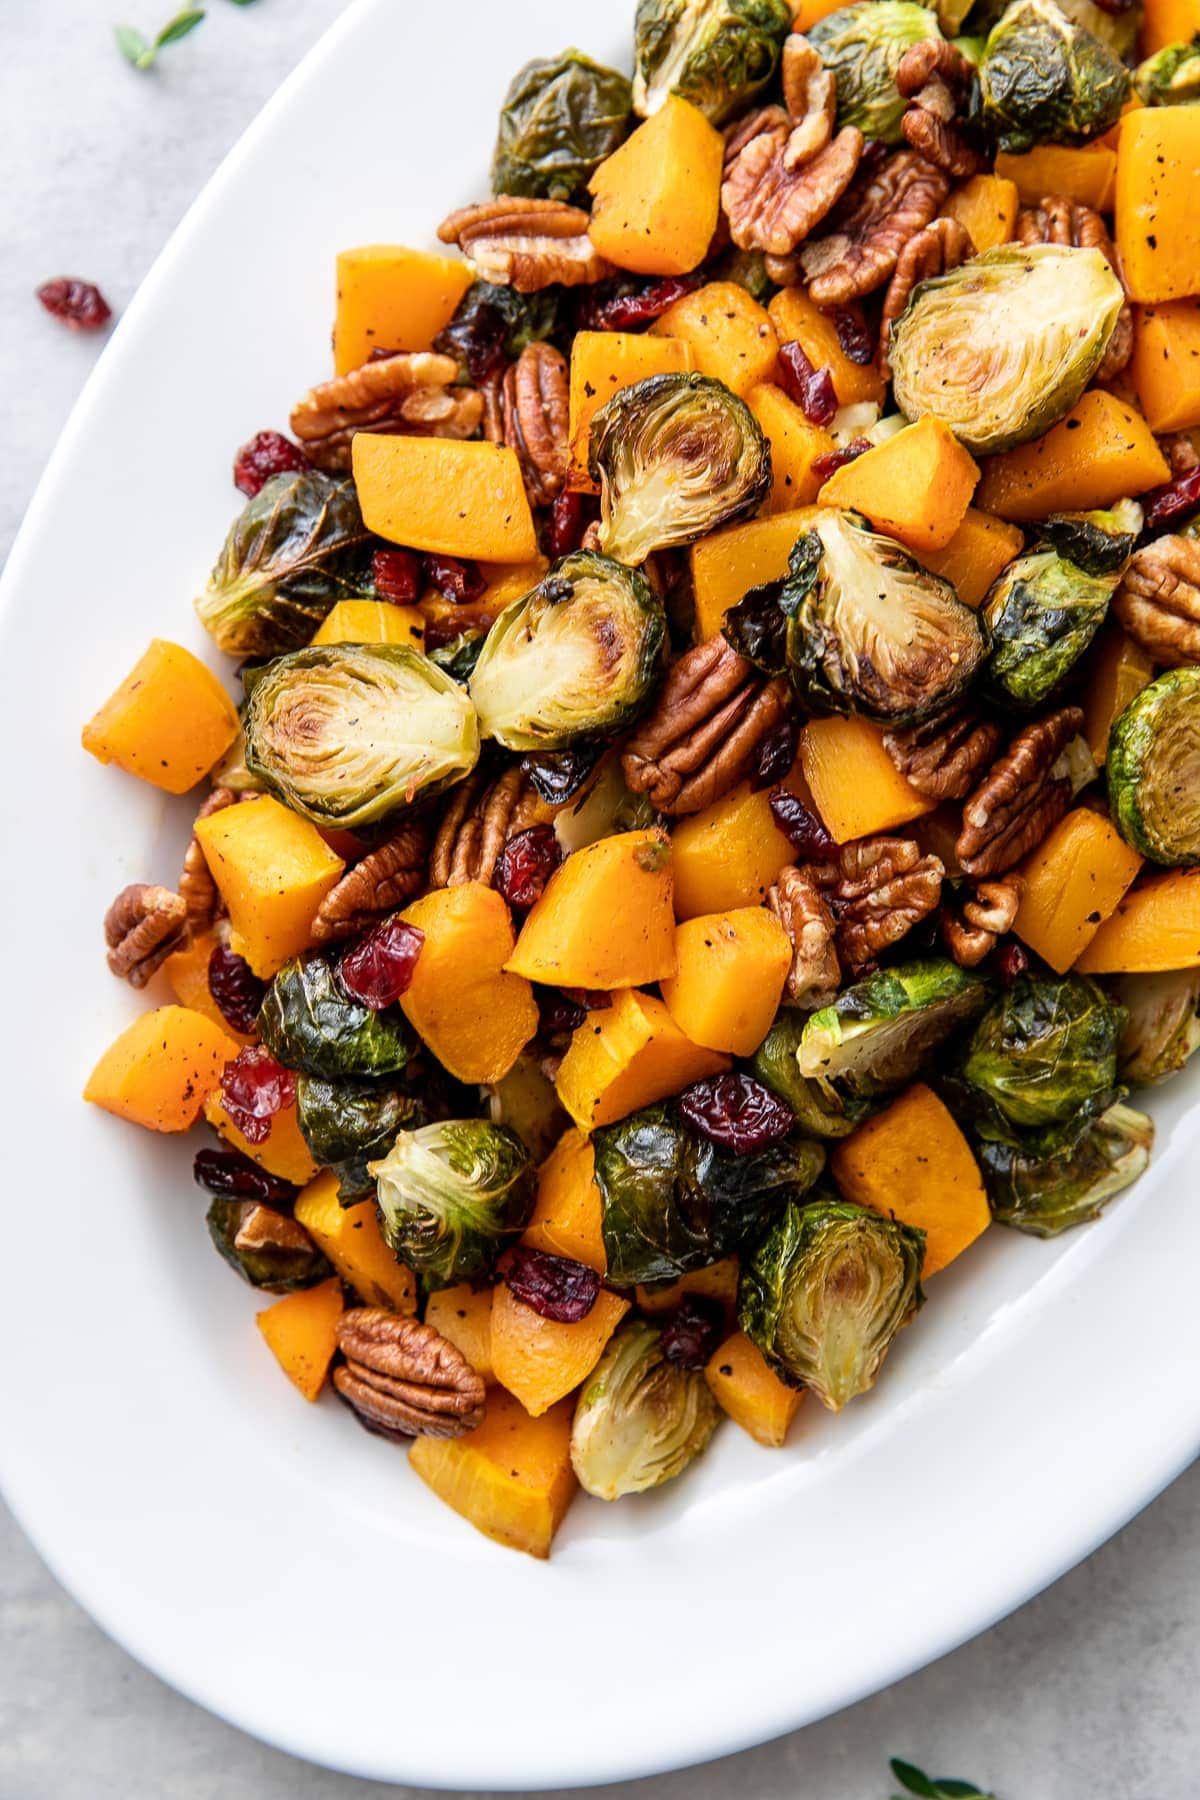 ROASTED BRUSSELS SPROUTS & BUTTERNUT SQUASH